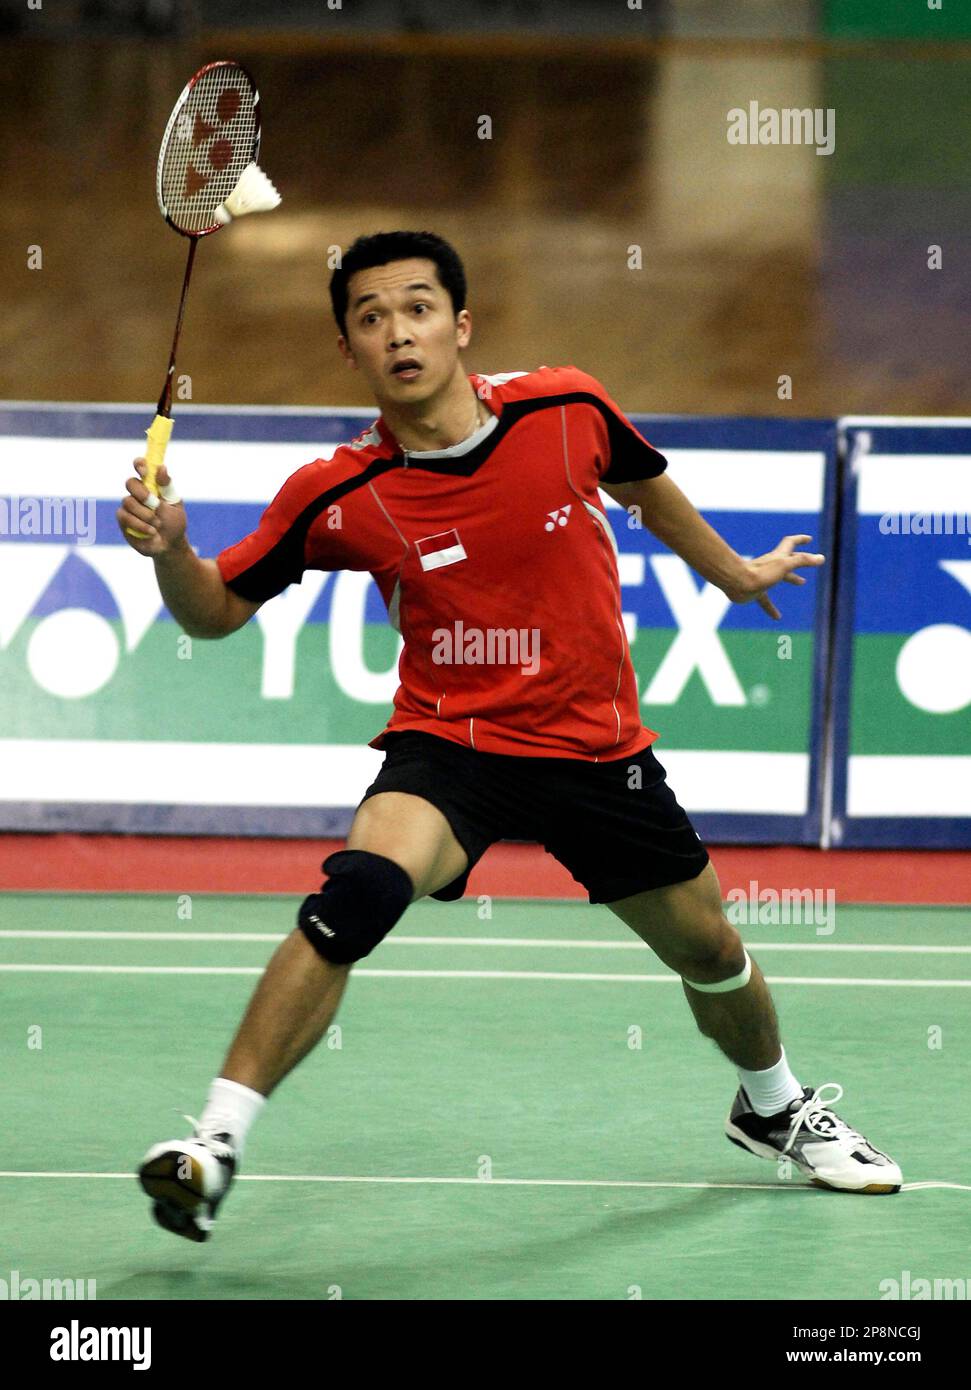 Indonesian badminton player Taufik Hidayat plays a shot against fellow Indonesian Tommy Sugiarto in the mens single semifinal of the Yonex Sunrise India Open 2009 in Hyderabad, India, Saturday, March 28, 2009.